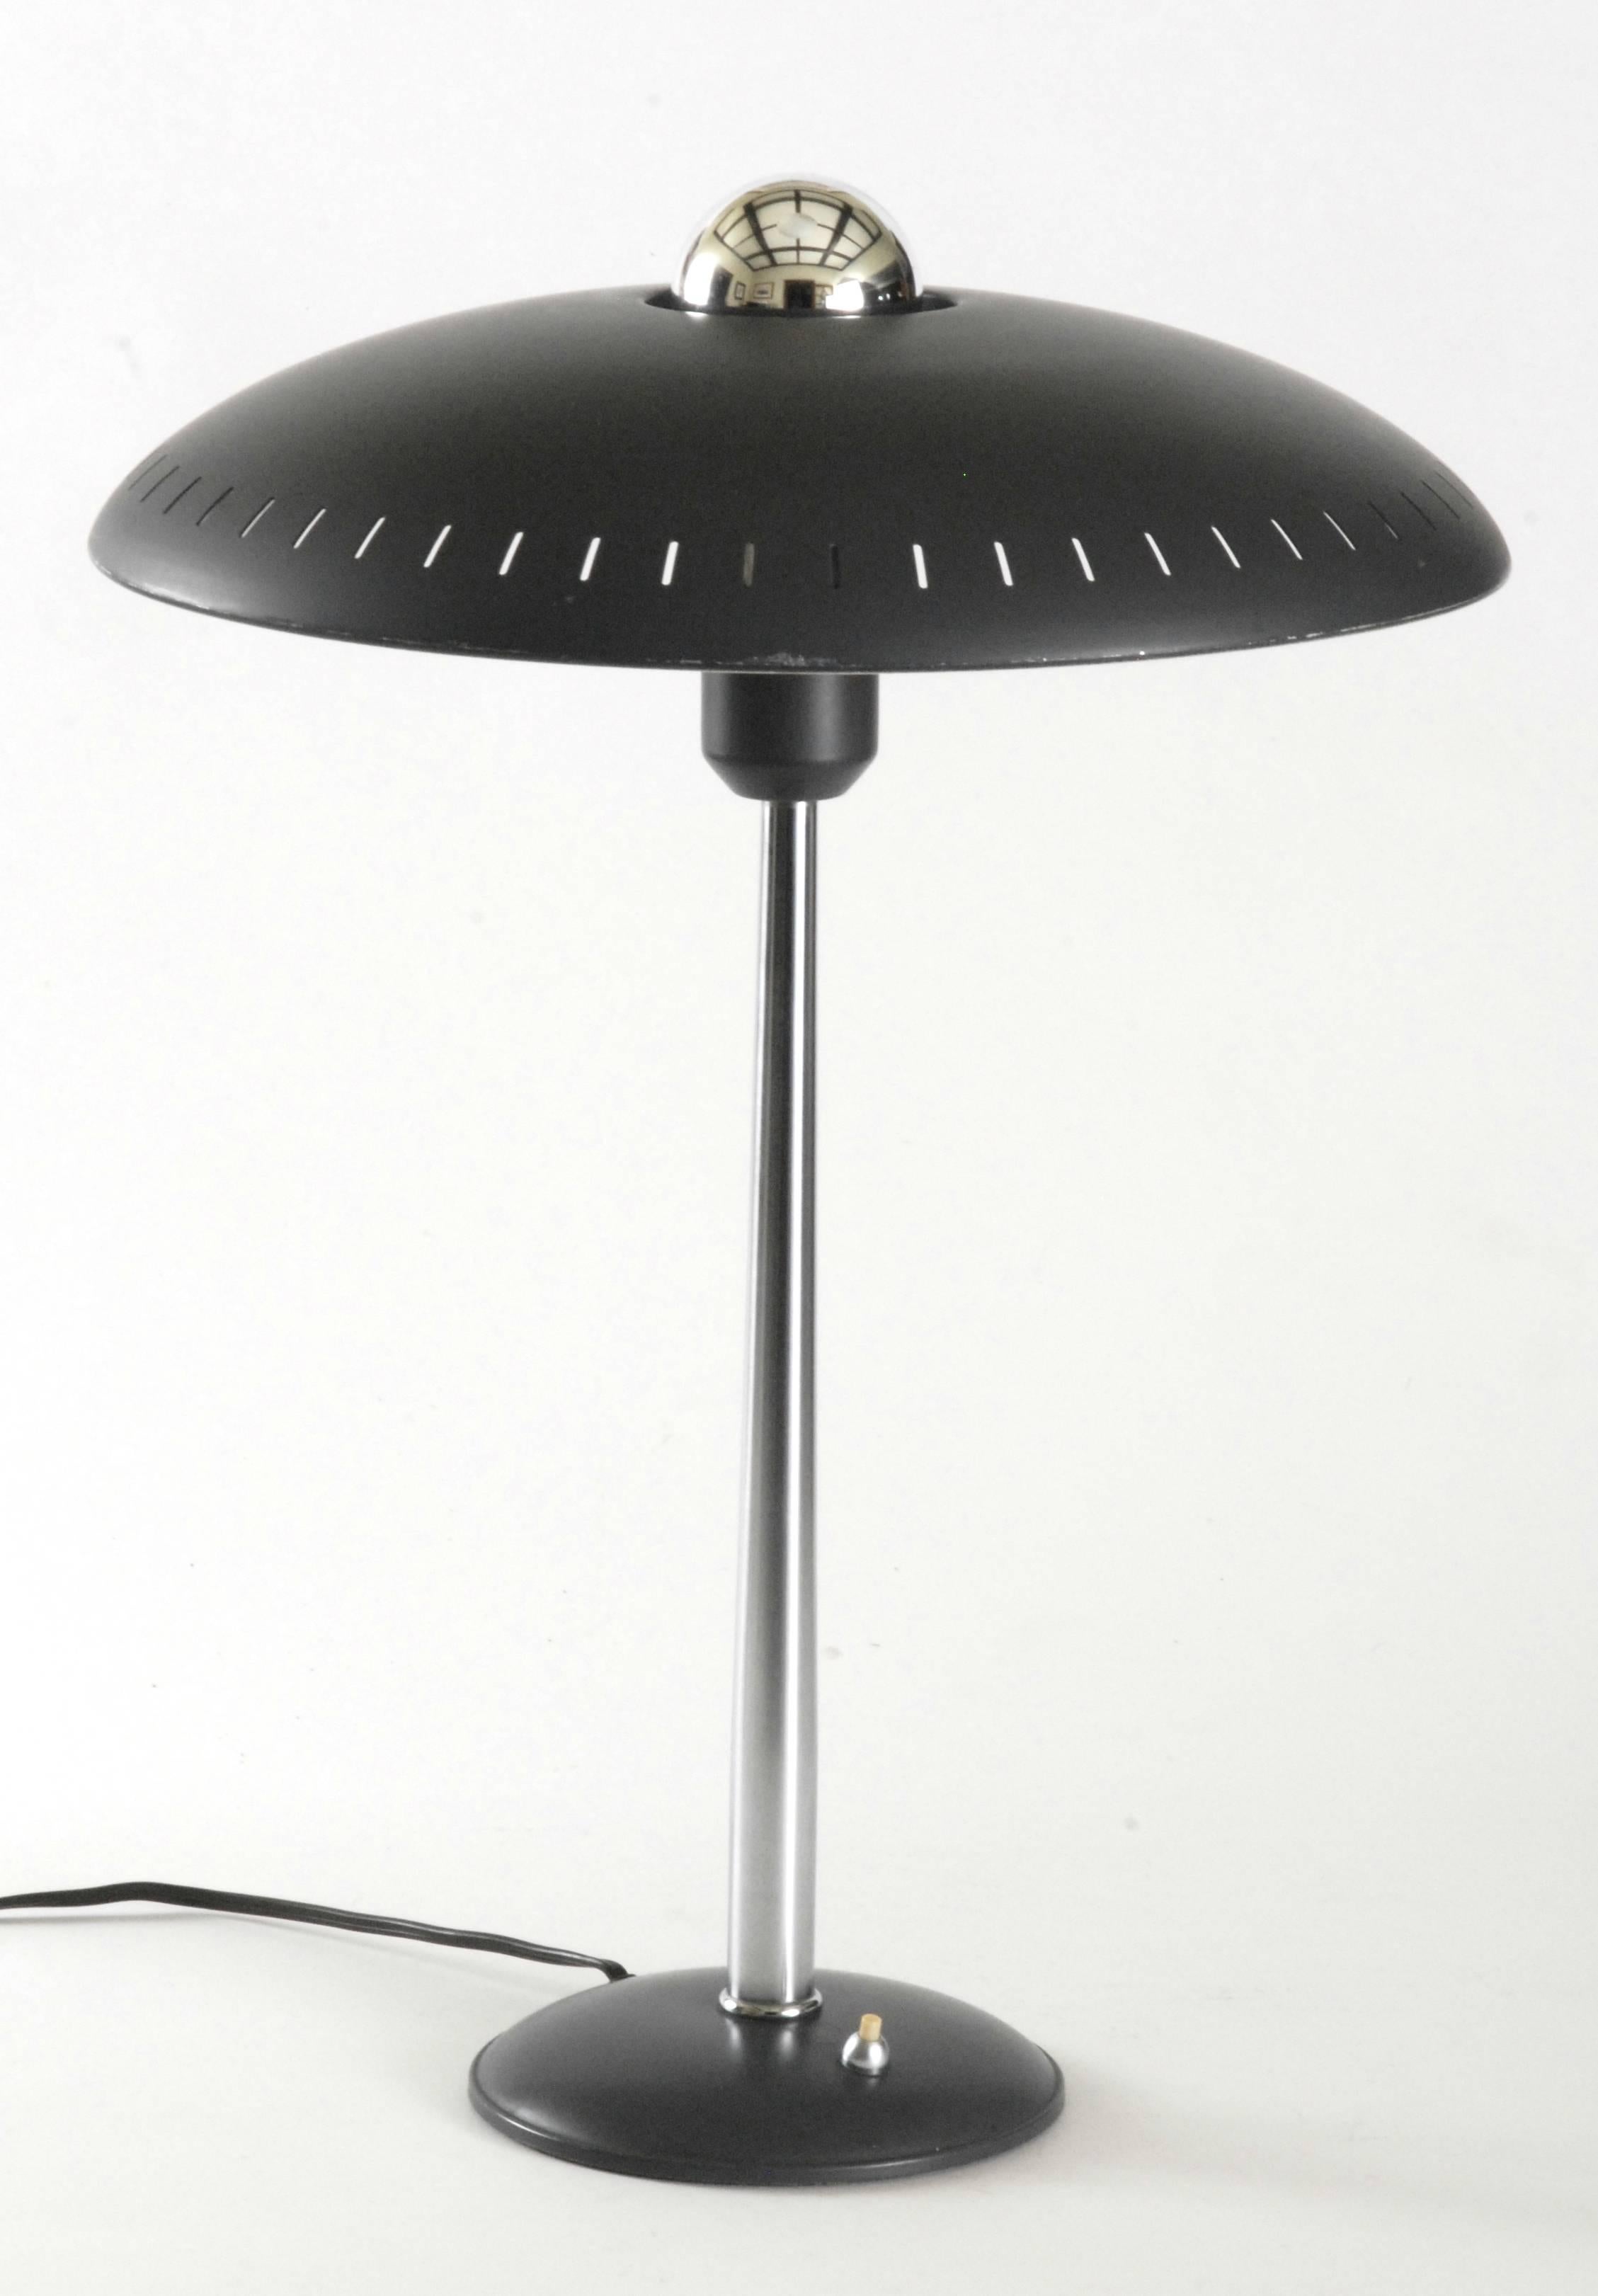 A good 'Timor' model Louis Kalff desk lamp with a pierced edge shade in dark grey and with a chrome stem finishing on a domed circular base.